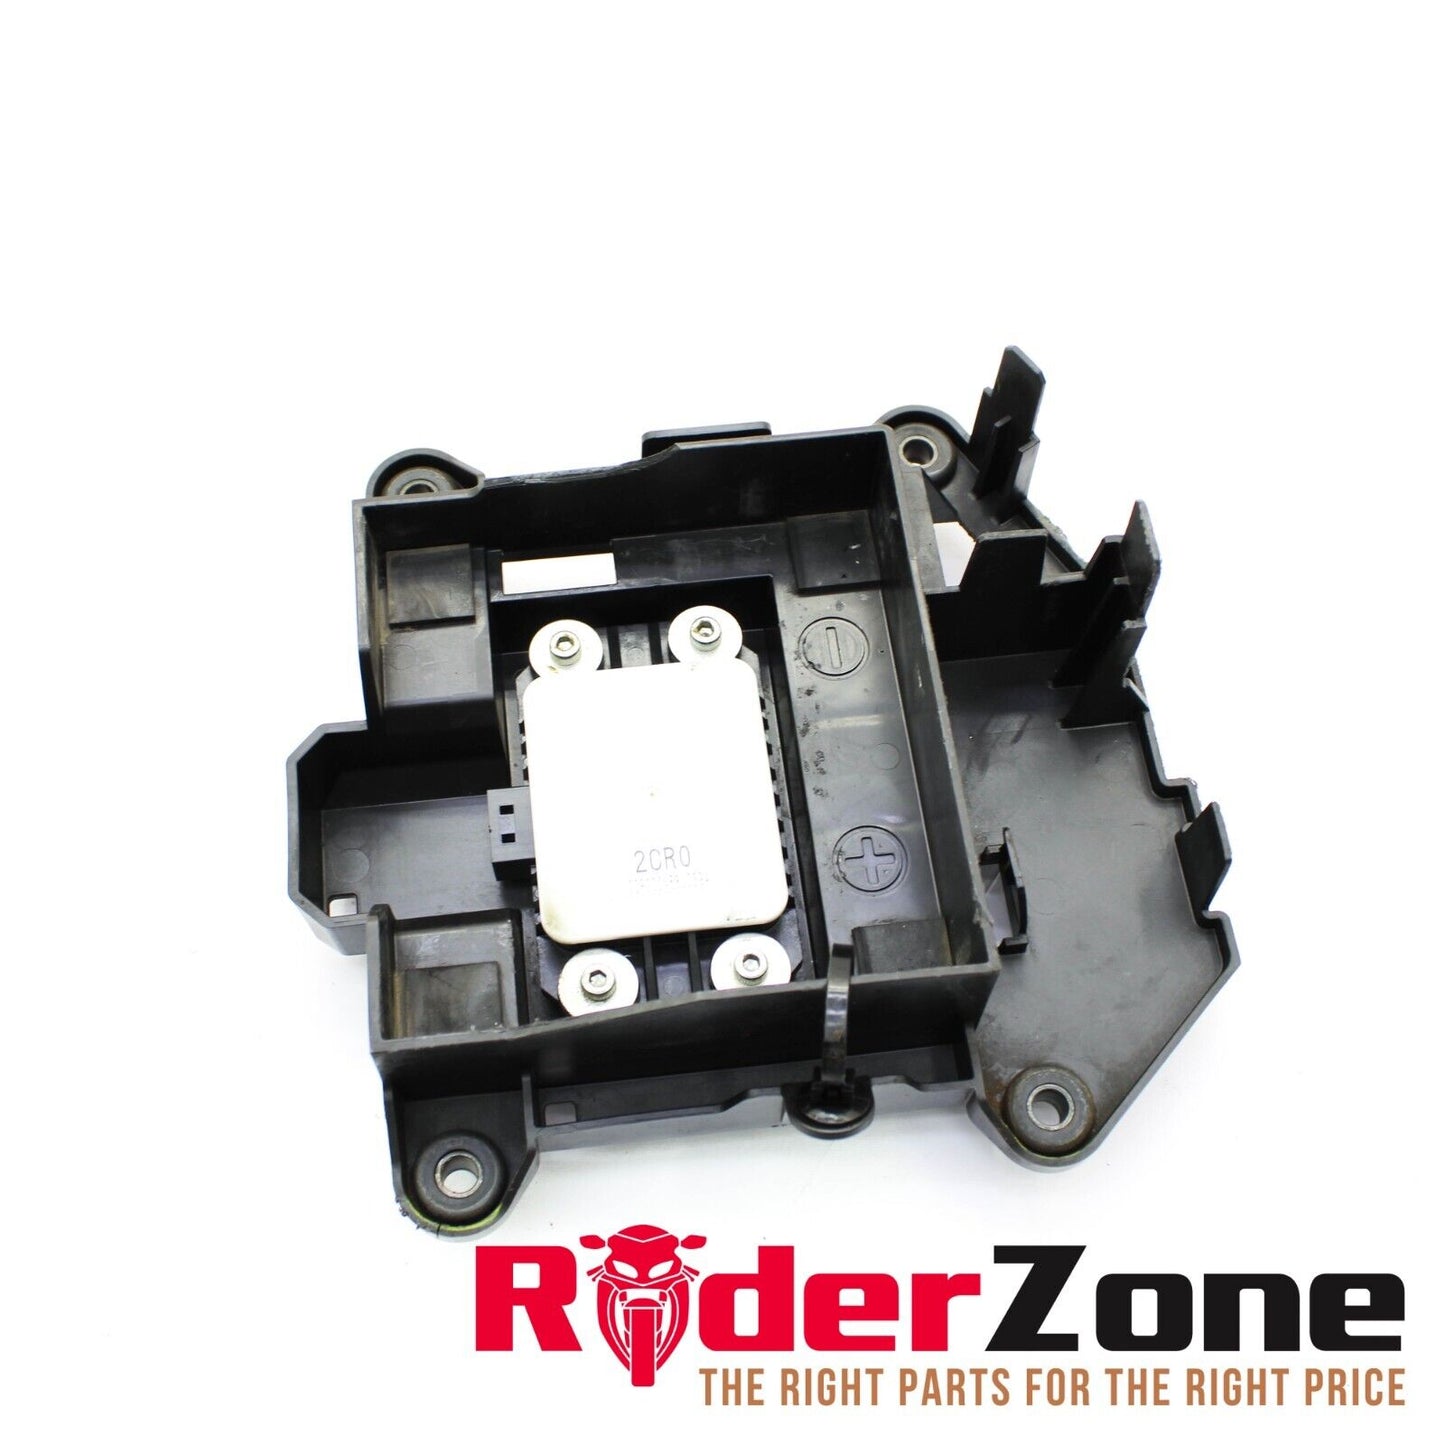 2015 - 2019 YAMAHA YZF R1 R1S R1M TRACTION CONTROL MODULE ELECTRICAL SYSTEM